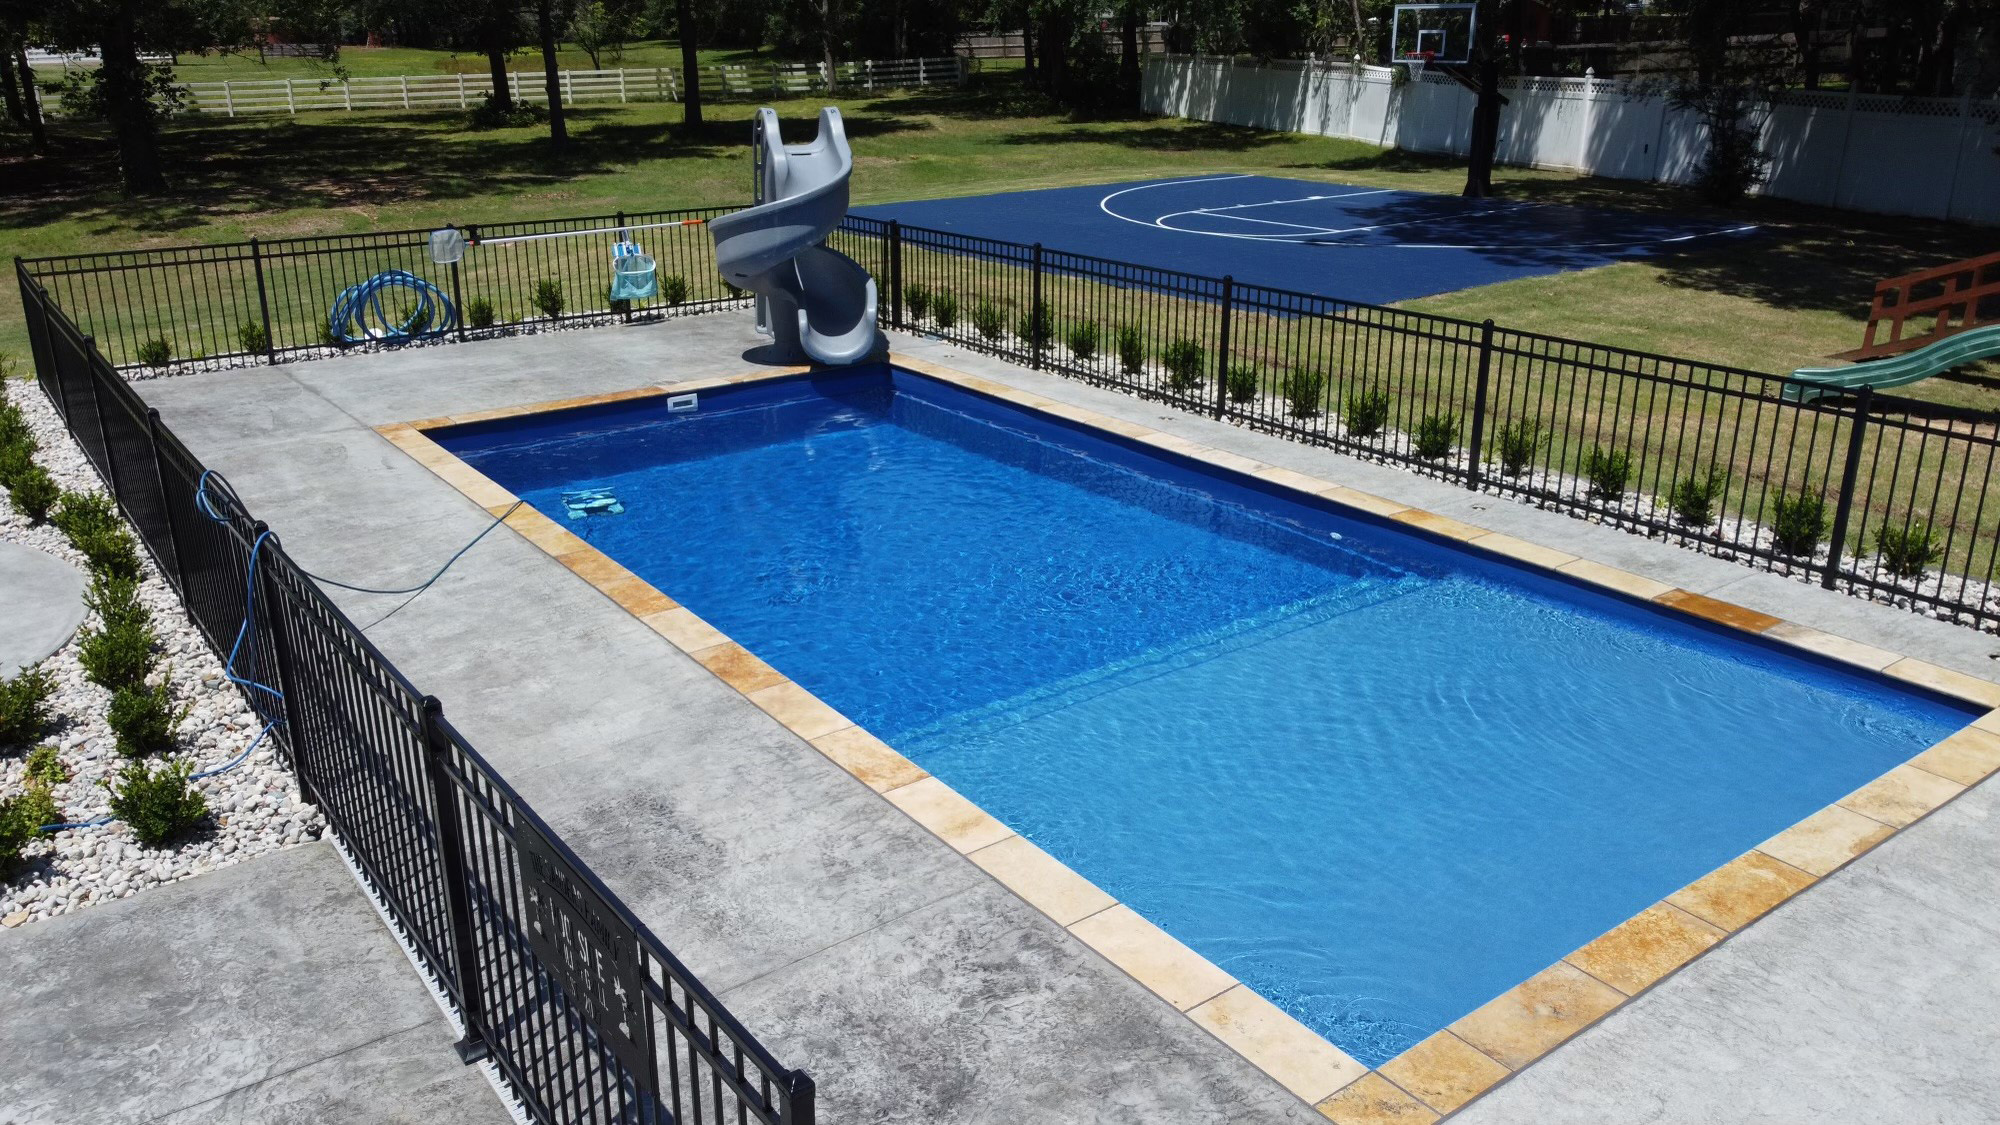 The Laguna Style pool for Gonzales Fiberglass Swimming Pools Texas manufactured by Lonestar to accomplish your dream of a private backyard oasis